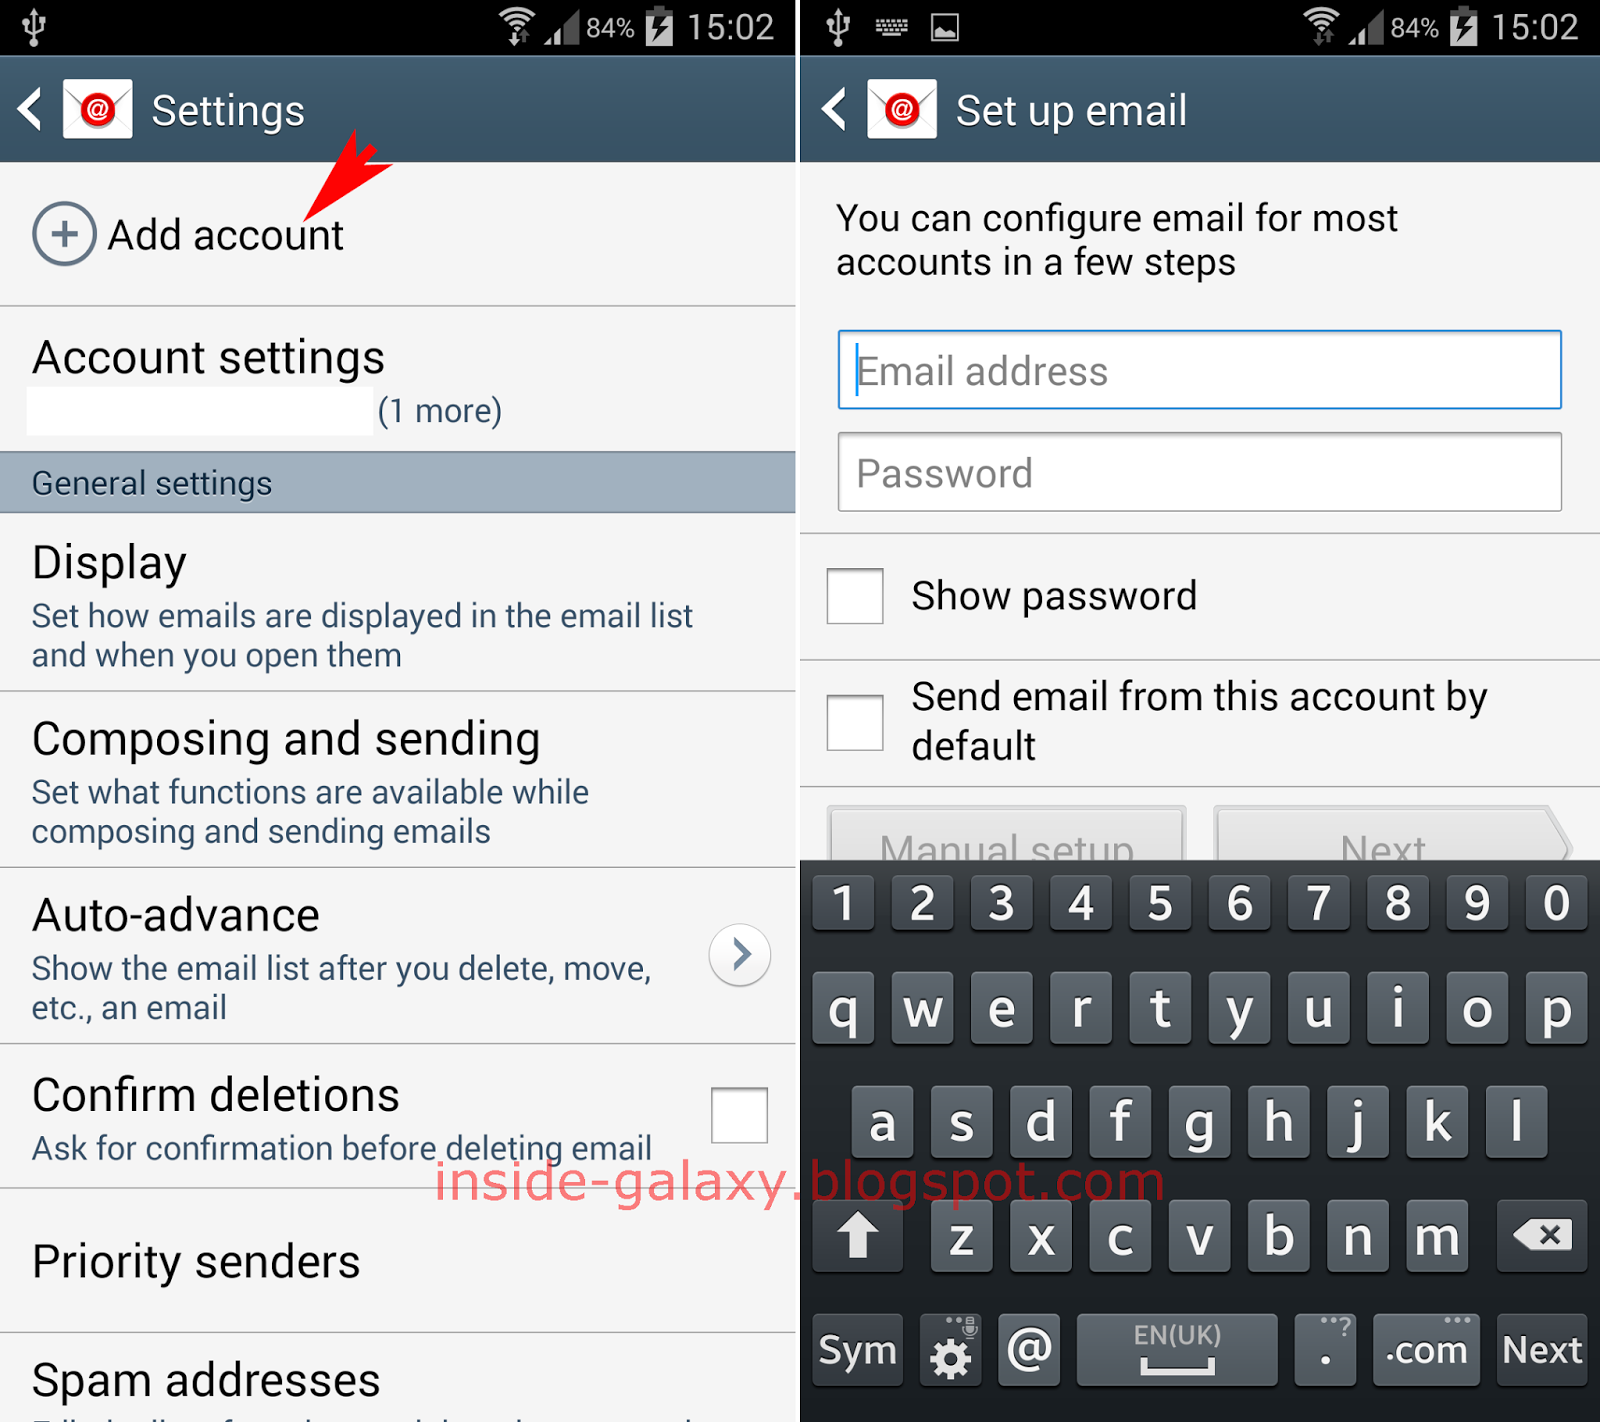 Samsung Galaxy S4: How to Add Multiple Email Accounts in 